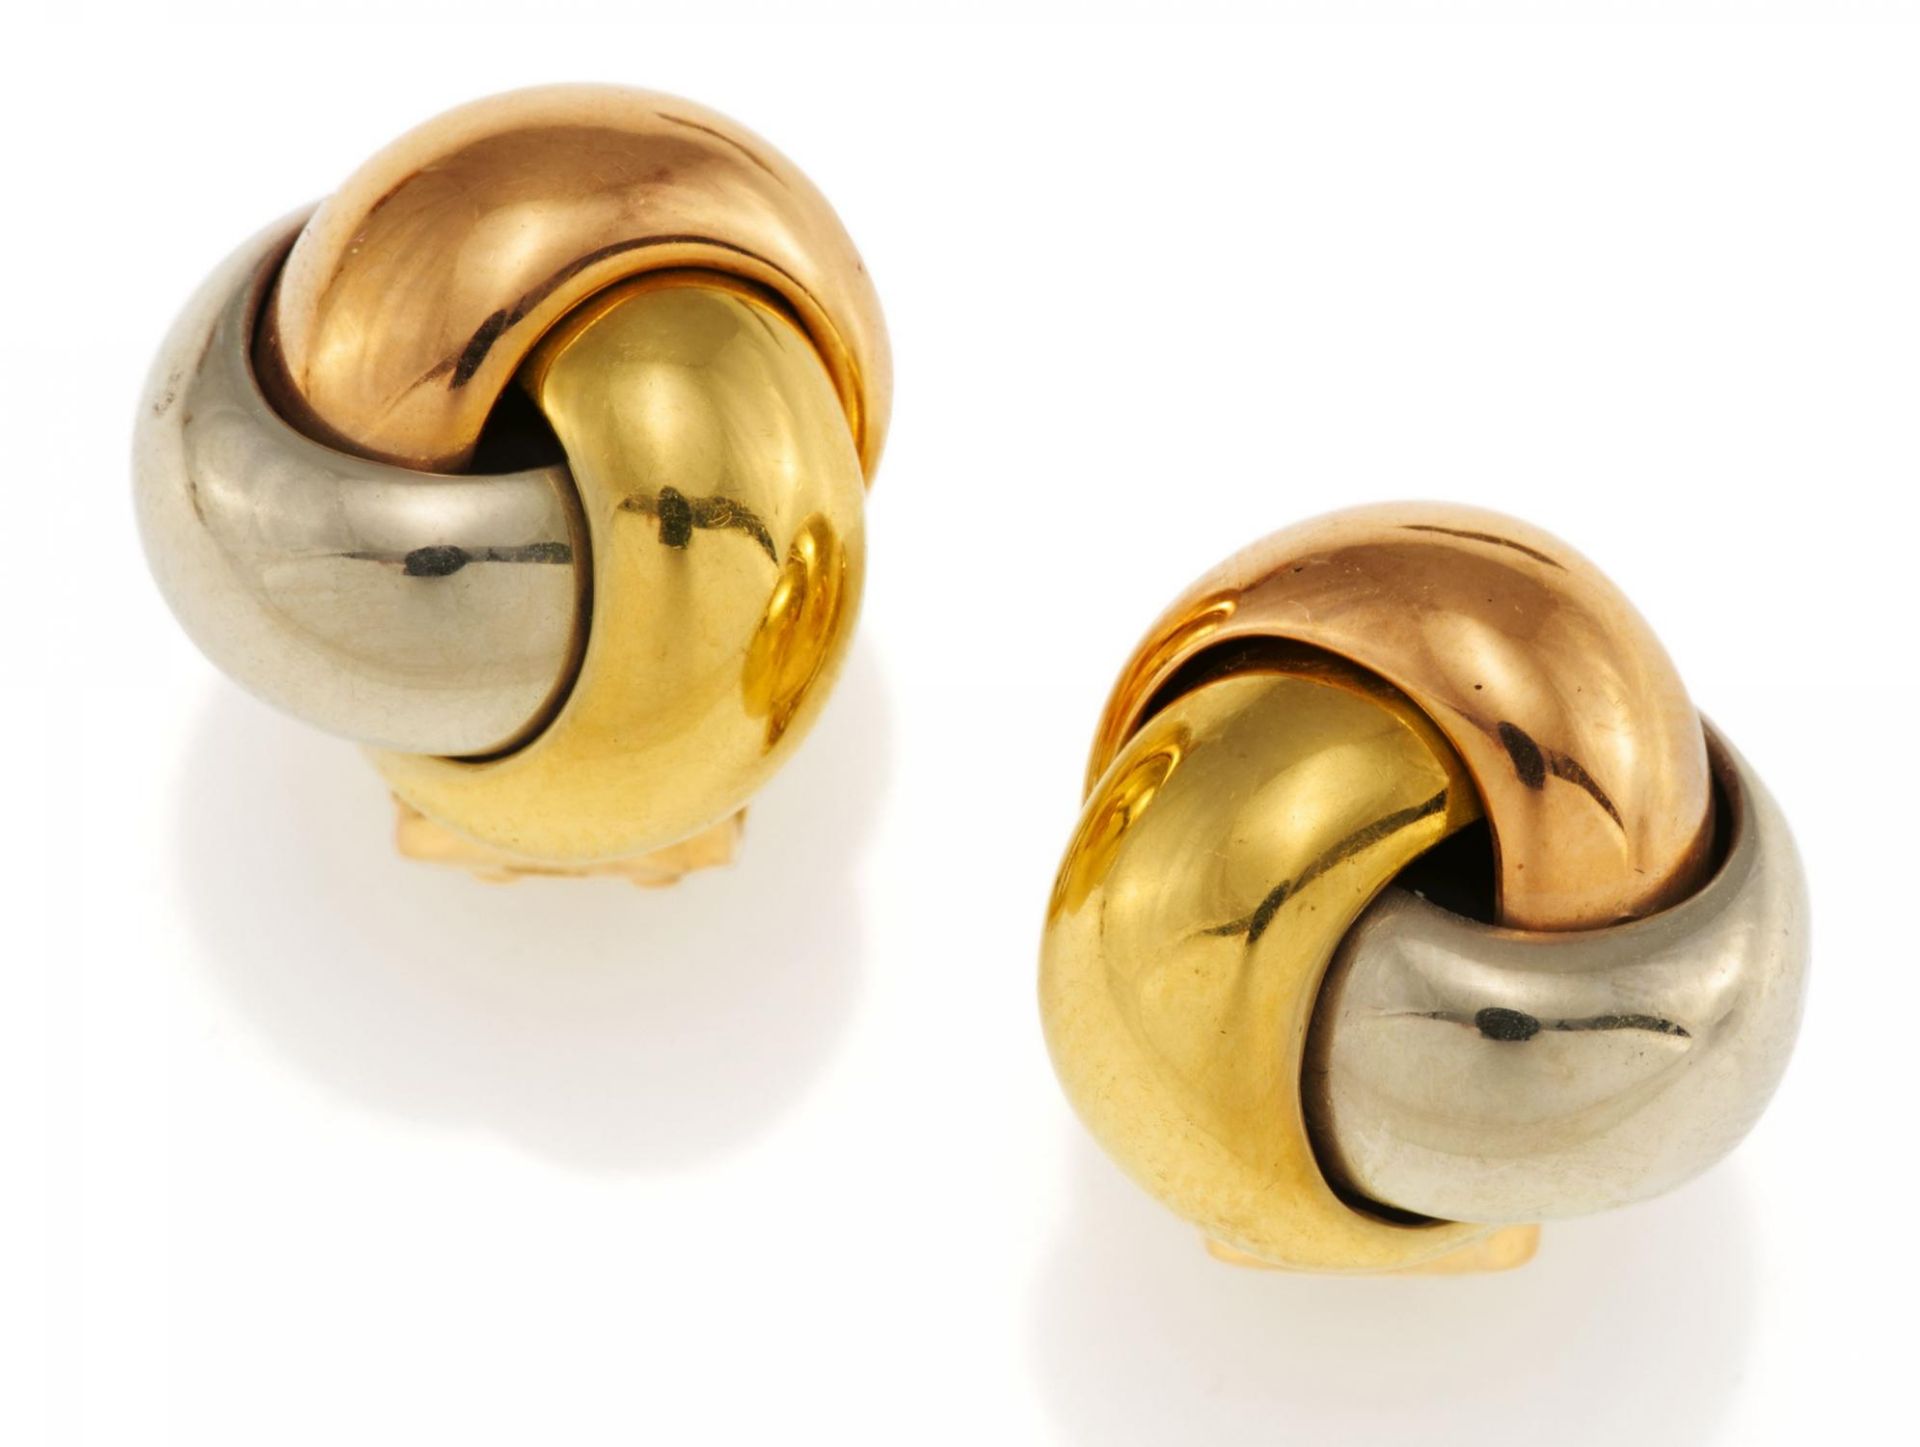 CARTIERTrinity Love Knot. Ear Stud Clips. Origin: France. Date: 1990s. Material: 750/- yellow-/